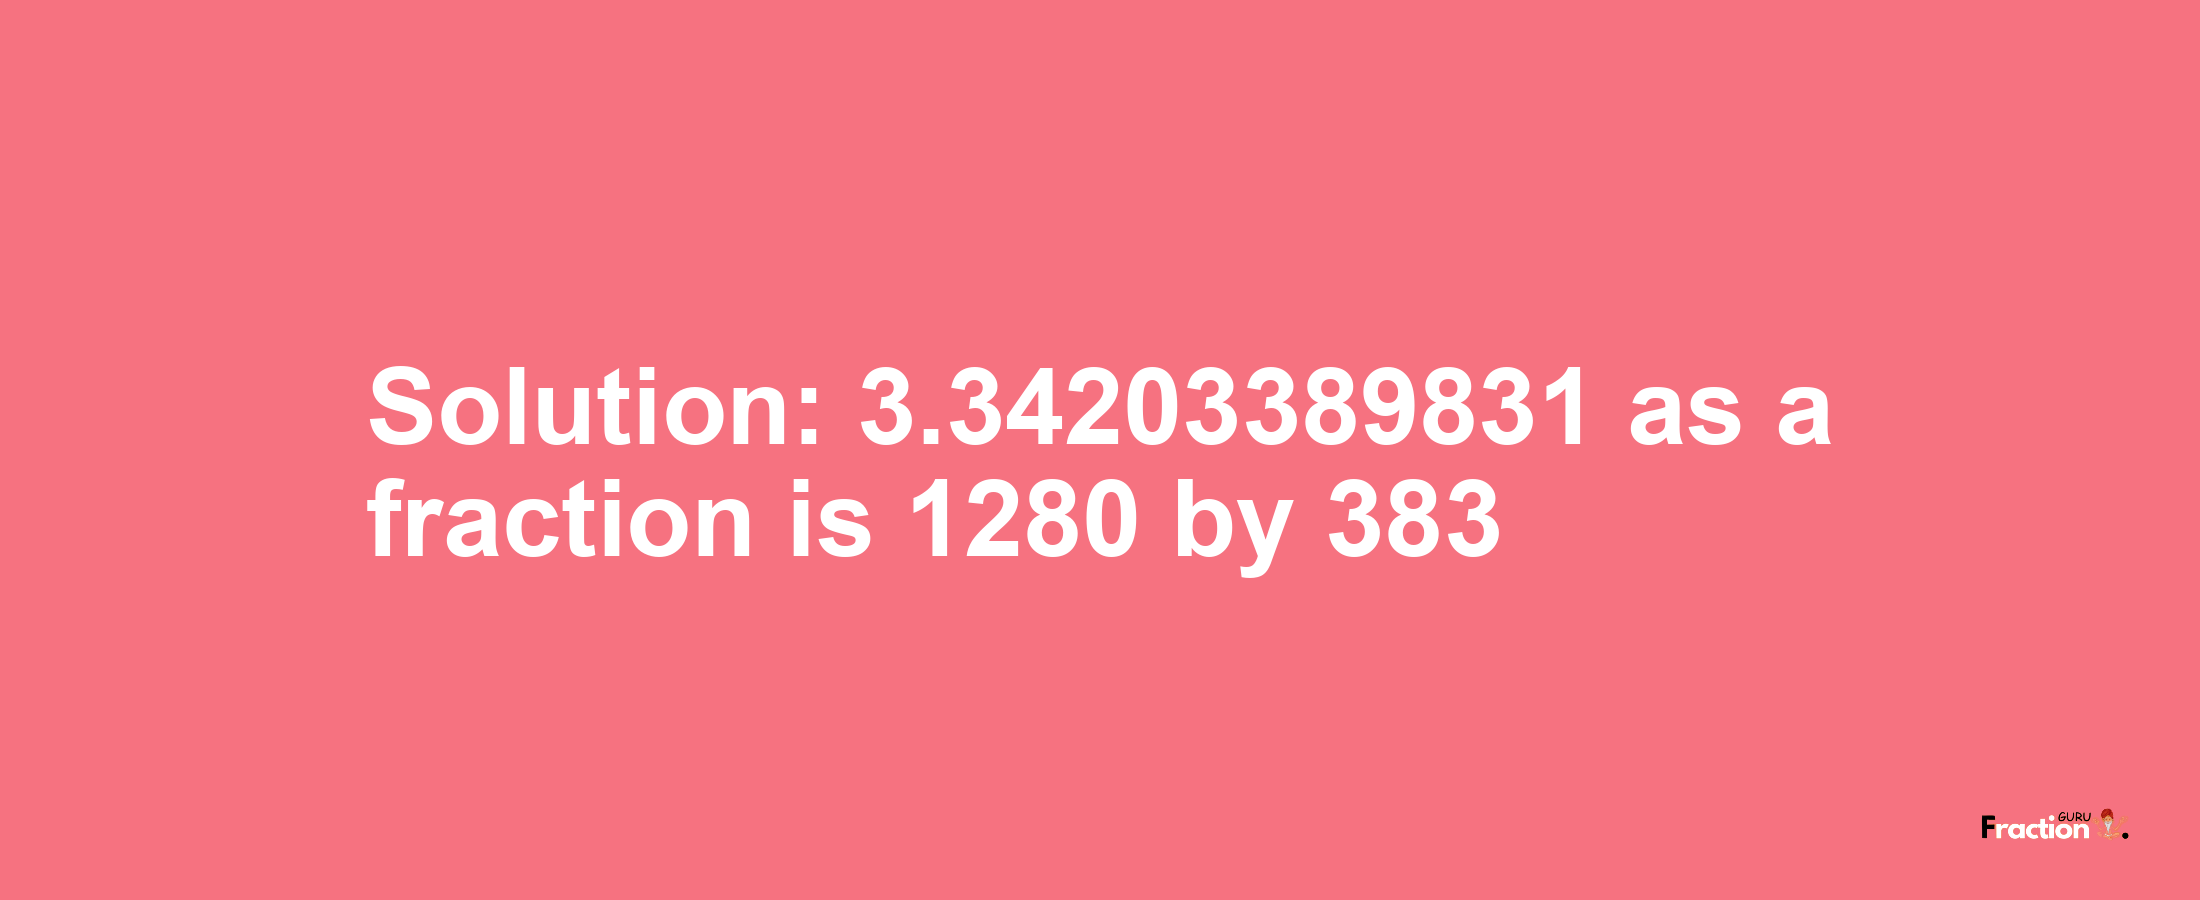 Solution:3.34203389831 as a fraction is 1280/383